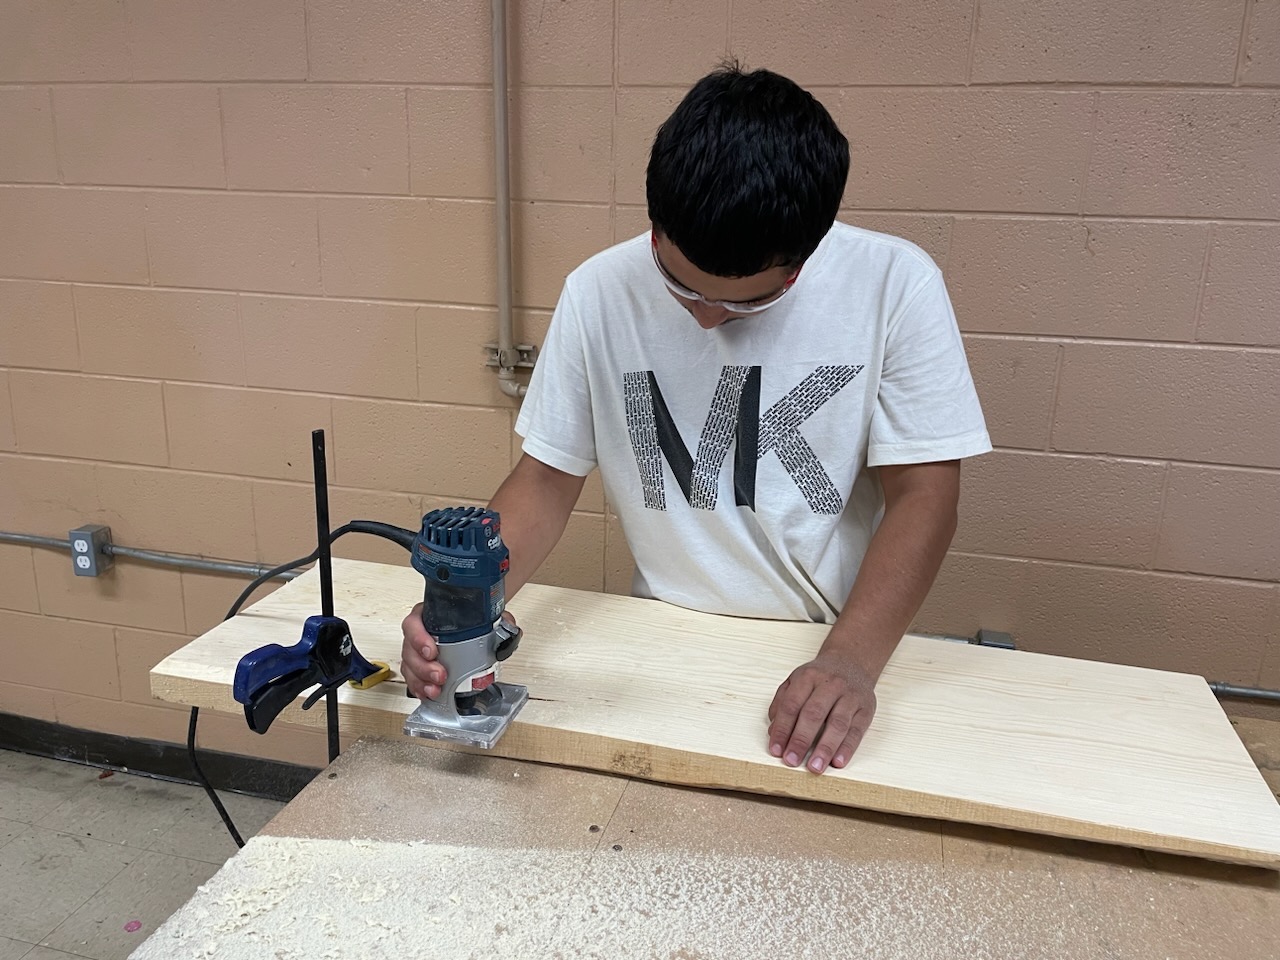 Student using a wood router.